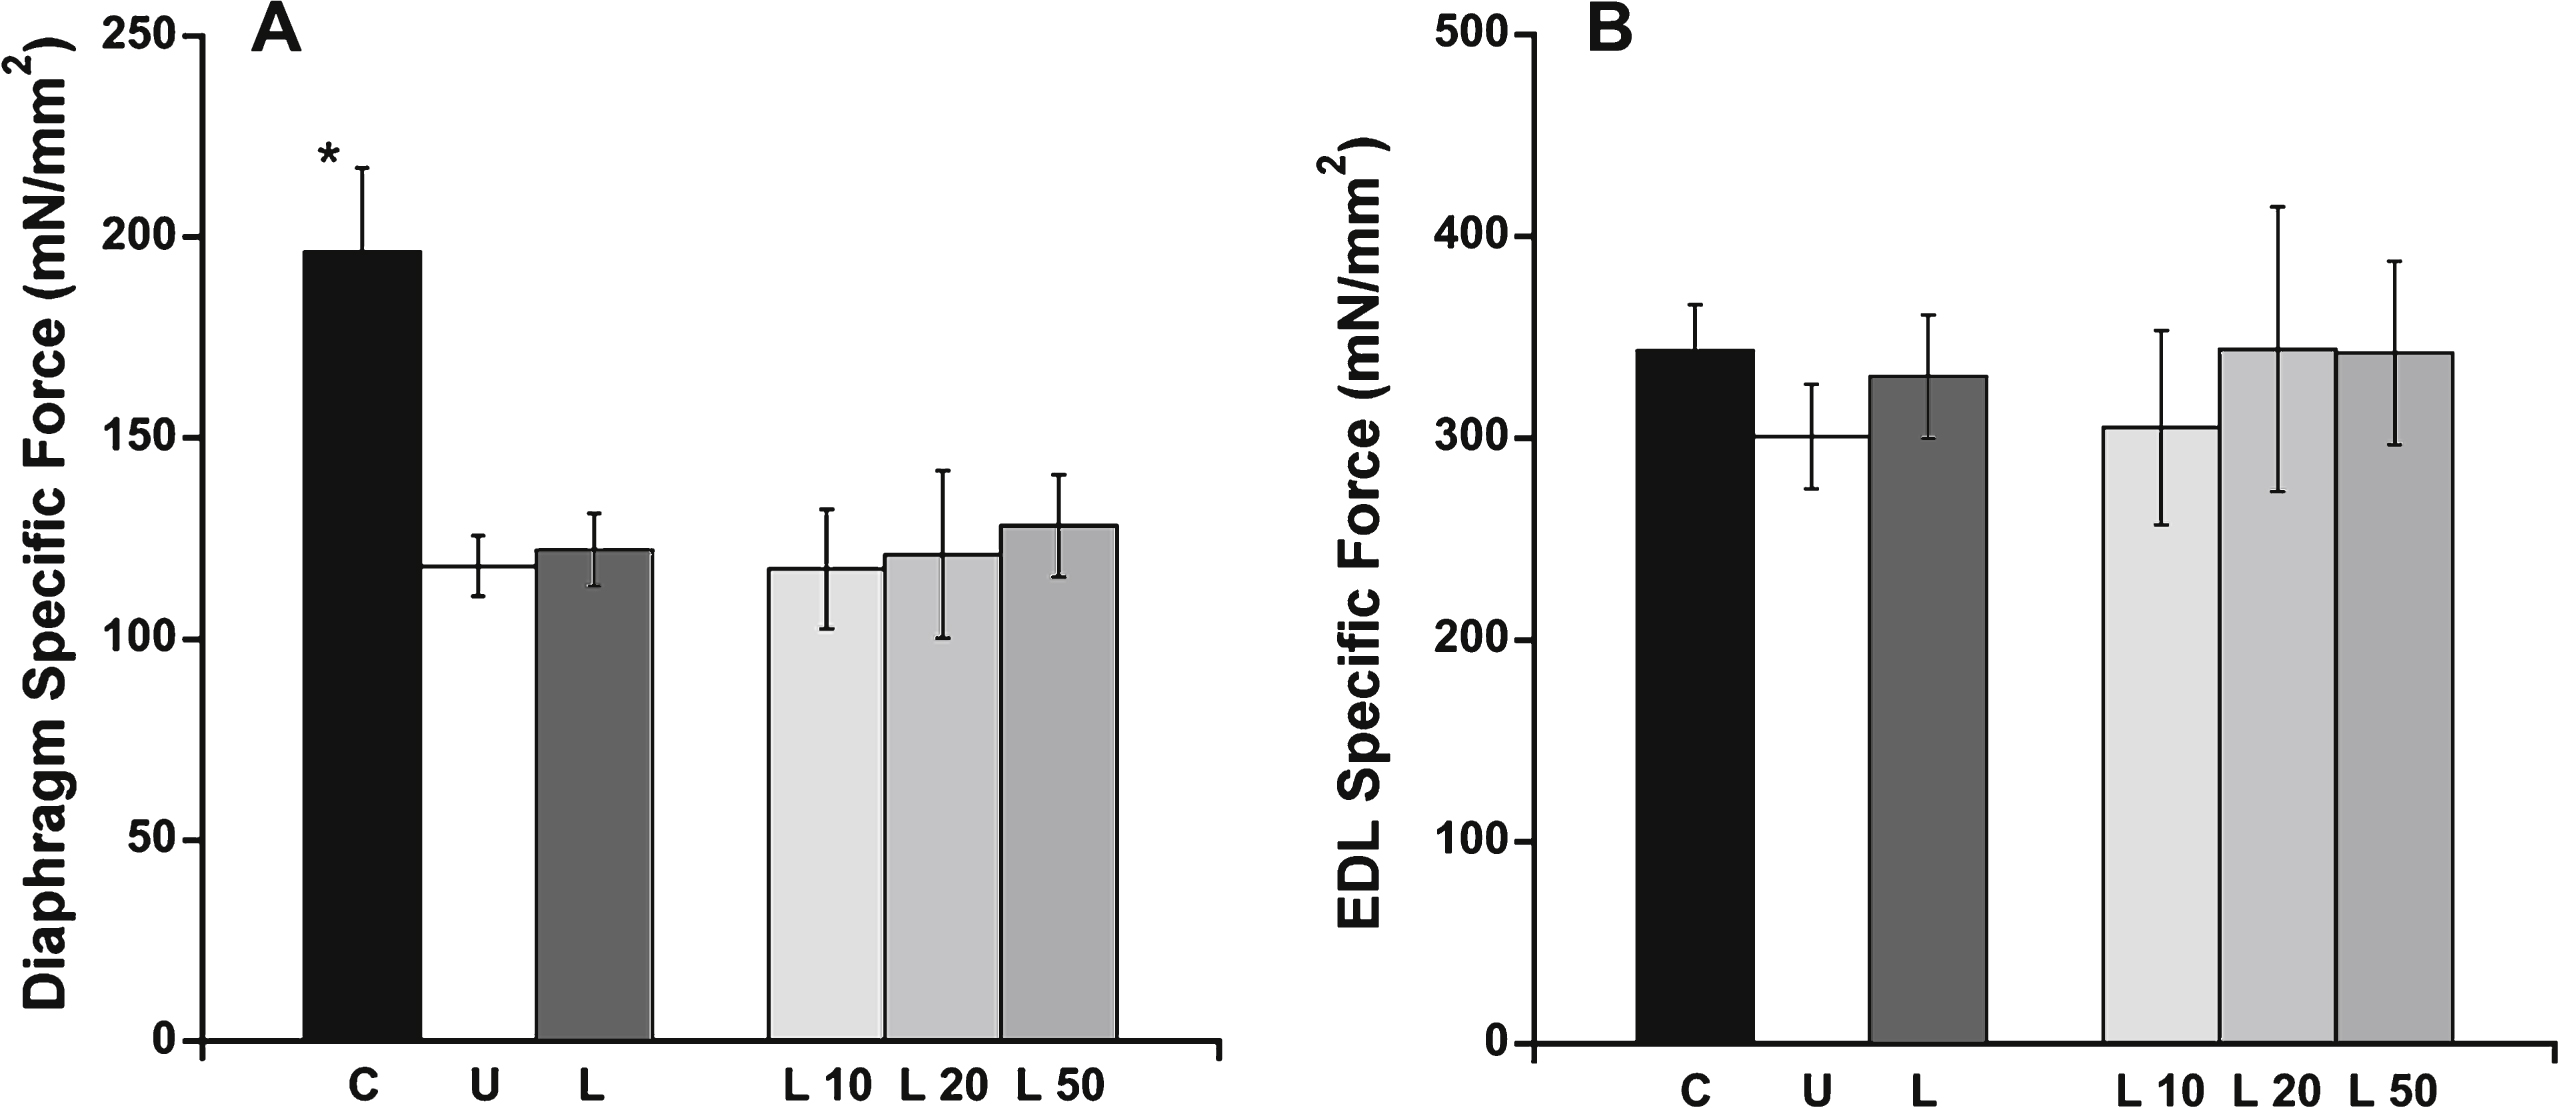 EDL and diaphragm force measurements. A) Normalized maximal contractile force in diaphragm muscle was only significantly higher in C57BL/10 compared with untreated het mice. B) EDL specific force showed no significant differences between the treatment groups. C: C57BL/10 wild-type control mice (n = 10); U: untreated het mice (n = 10); L: all 3 groups of lisinopril-treated het mice (n = 18); and L10, L20, L50 = groups of het mice treated with lisinopril at 3 different (10, 20, and 50 mg/kg × day) dosages (n = 6 per group). Data are shown as means  ±  SEM.  *indicates a significantly higher value compared to the untreated het group, via ANOVA followed by a Dunnett post-hoc test, P = 0.0009.